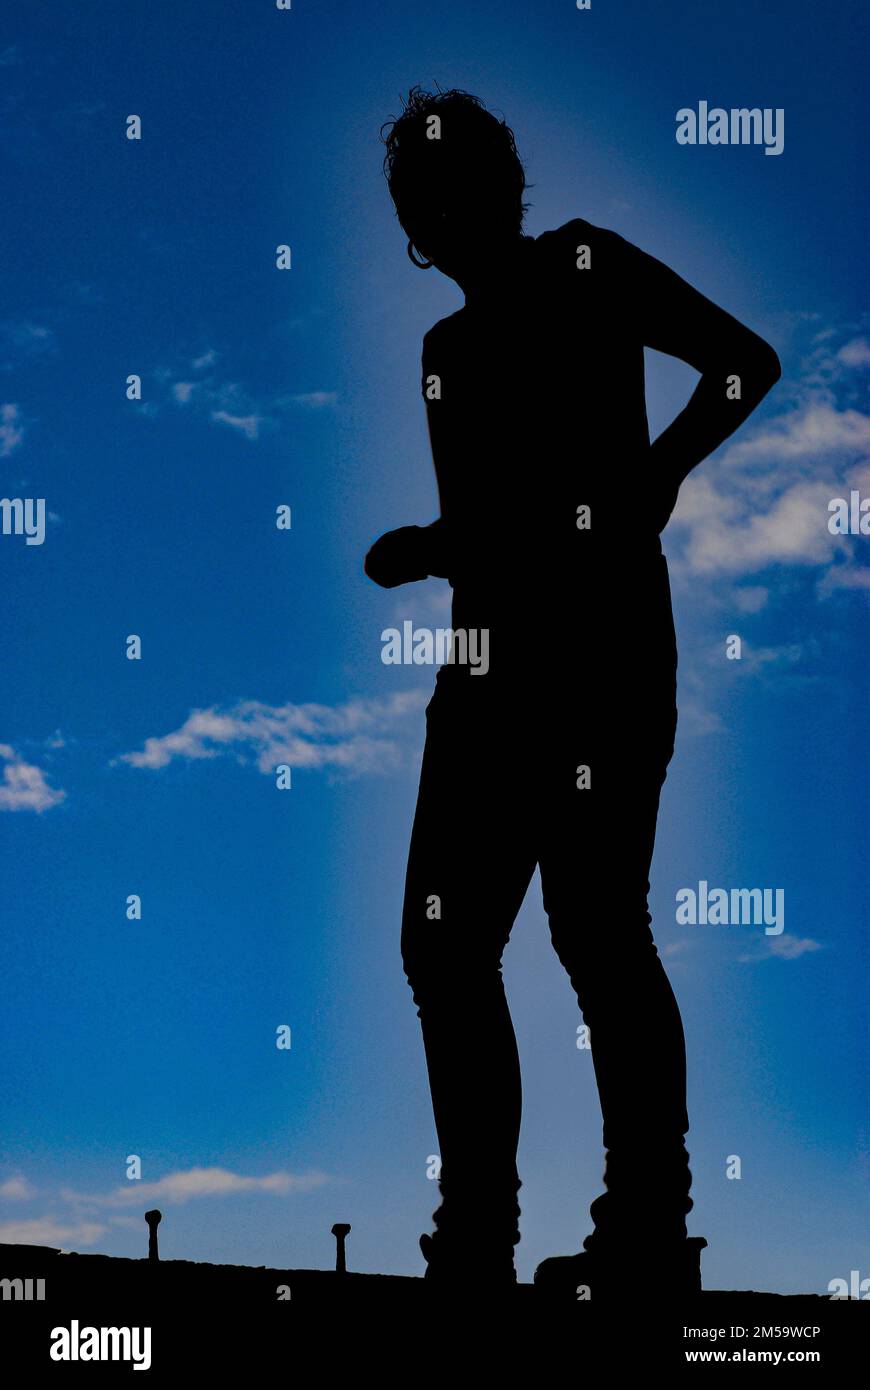 girl silhouetted against blue sky background Stock Photo